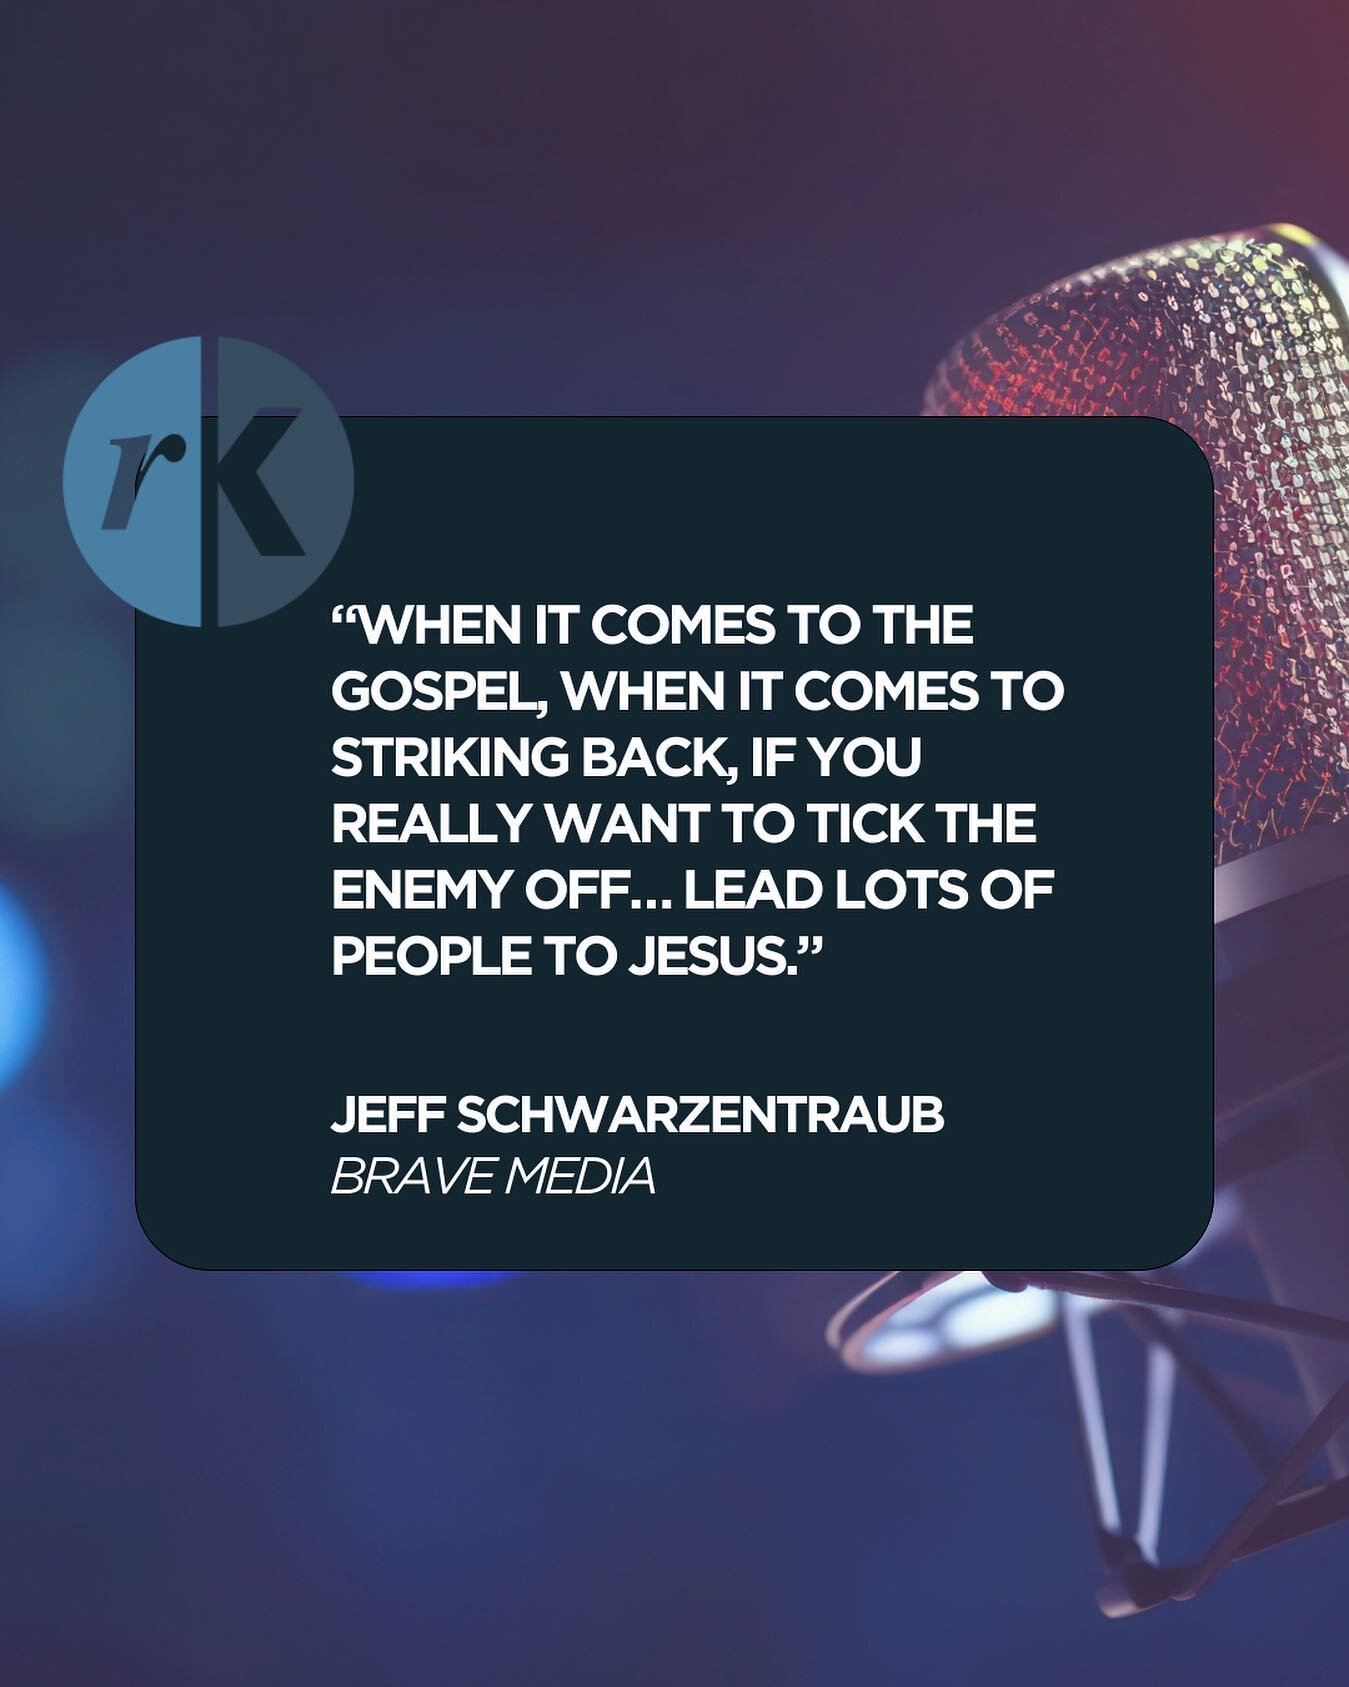 A dose of truth from Pastor Jeff Schwarzentraub for your Friday! 

#quote #jesus #christian #christianmedia #rkmedia